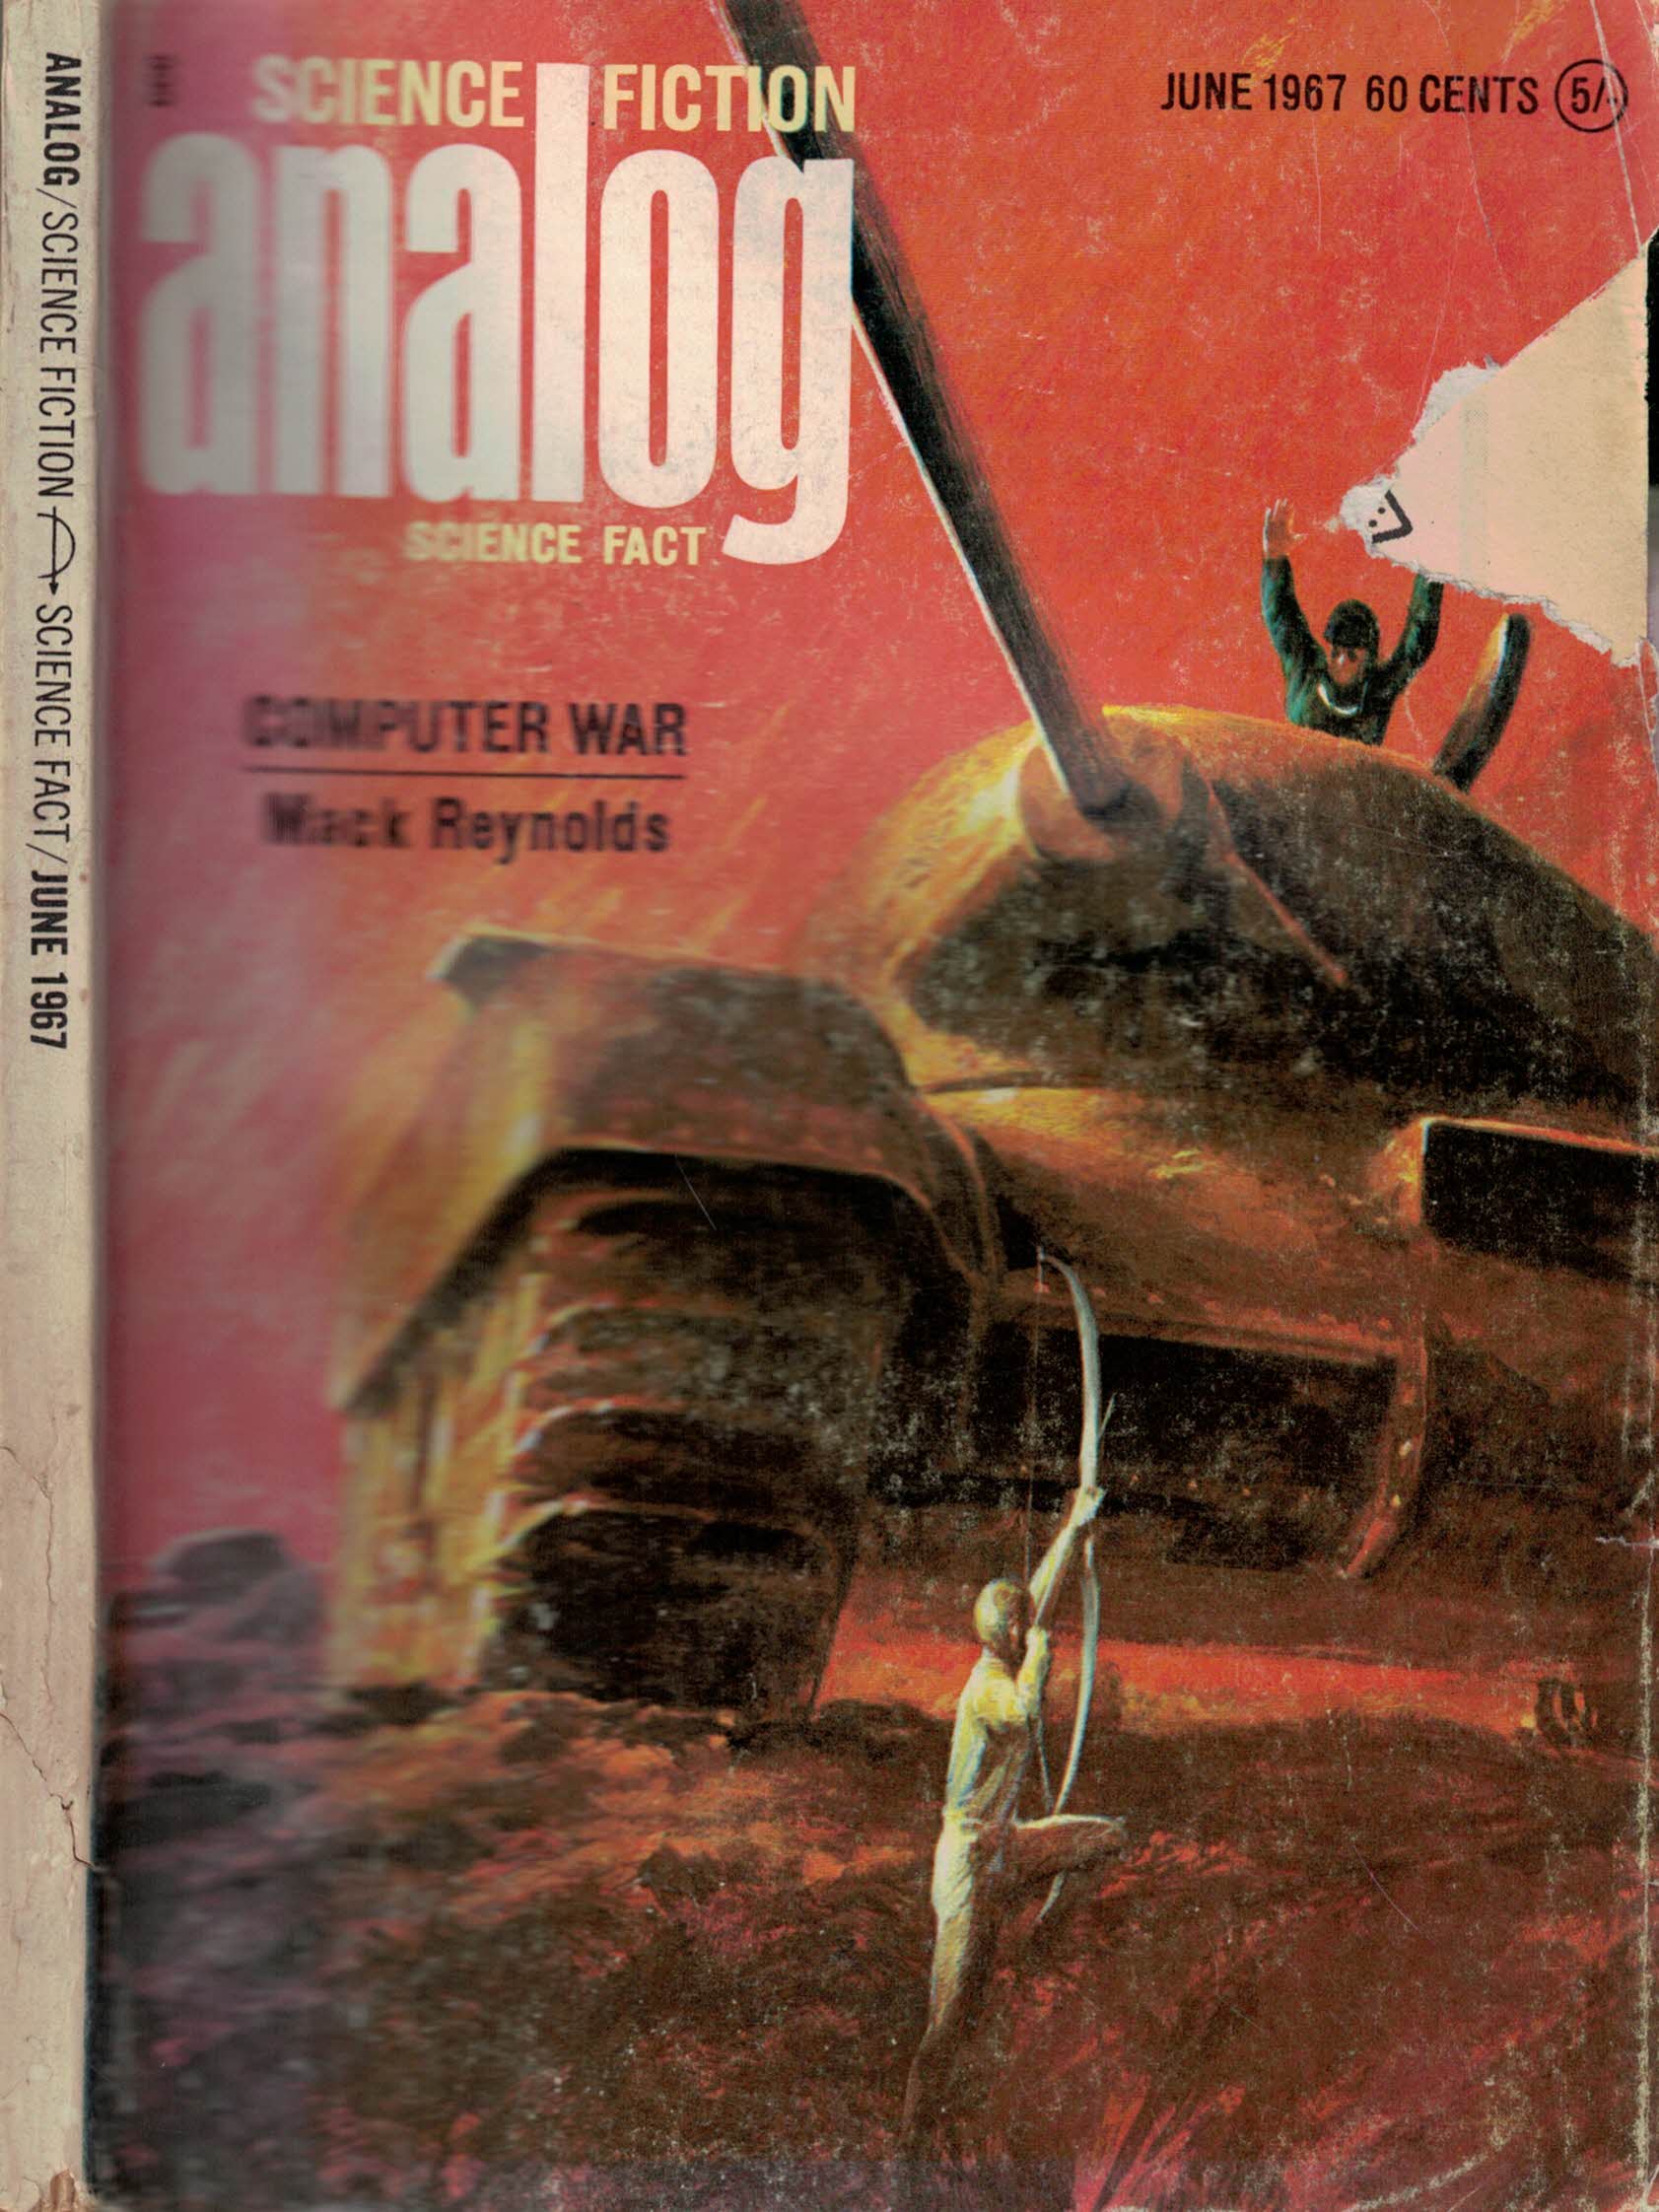 Analog. Science Fiction and Fact. Volume 79, No. 4. June 1967.